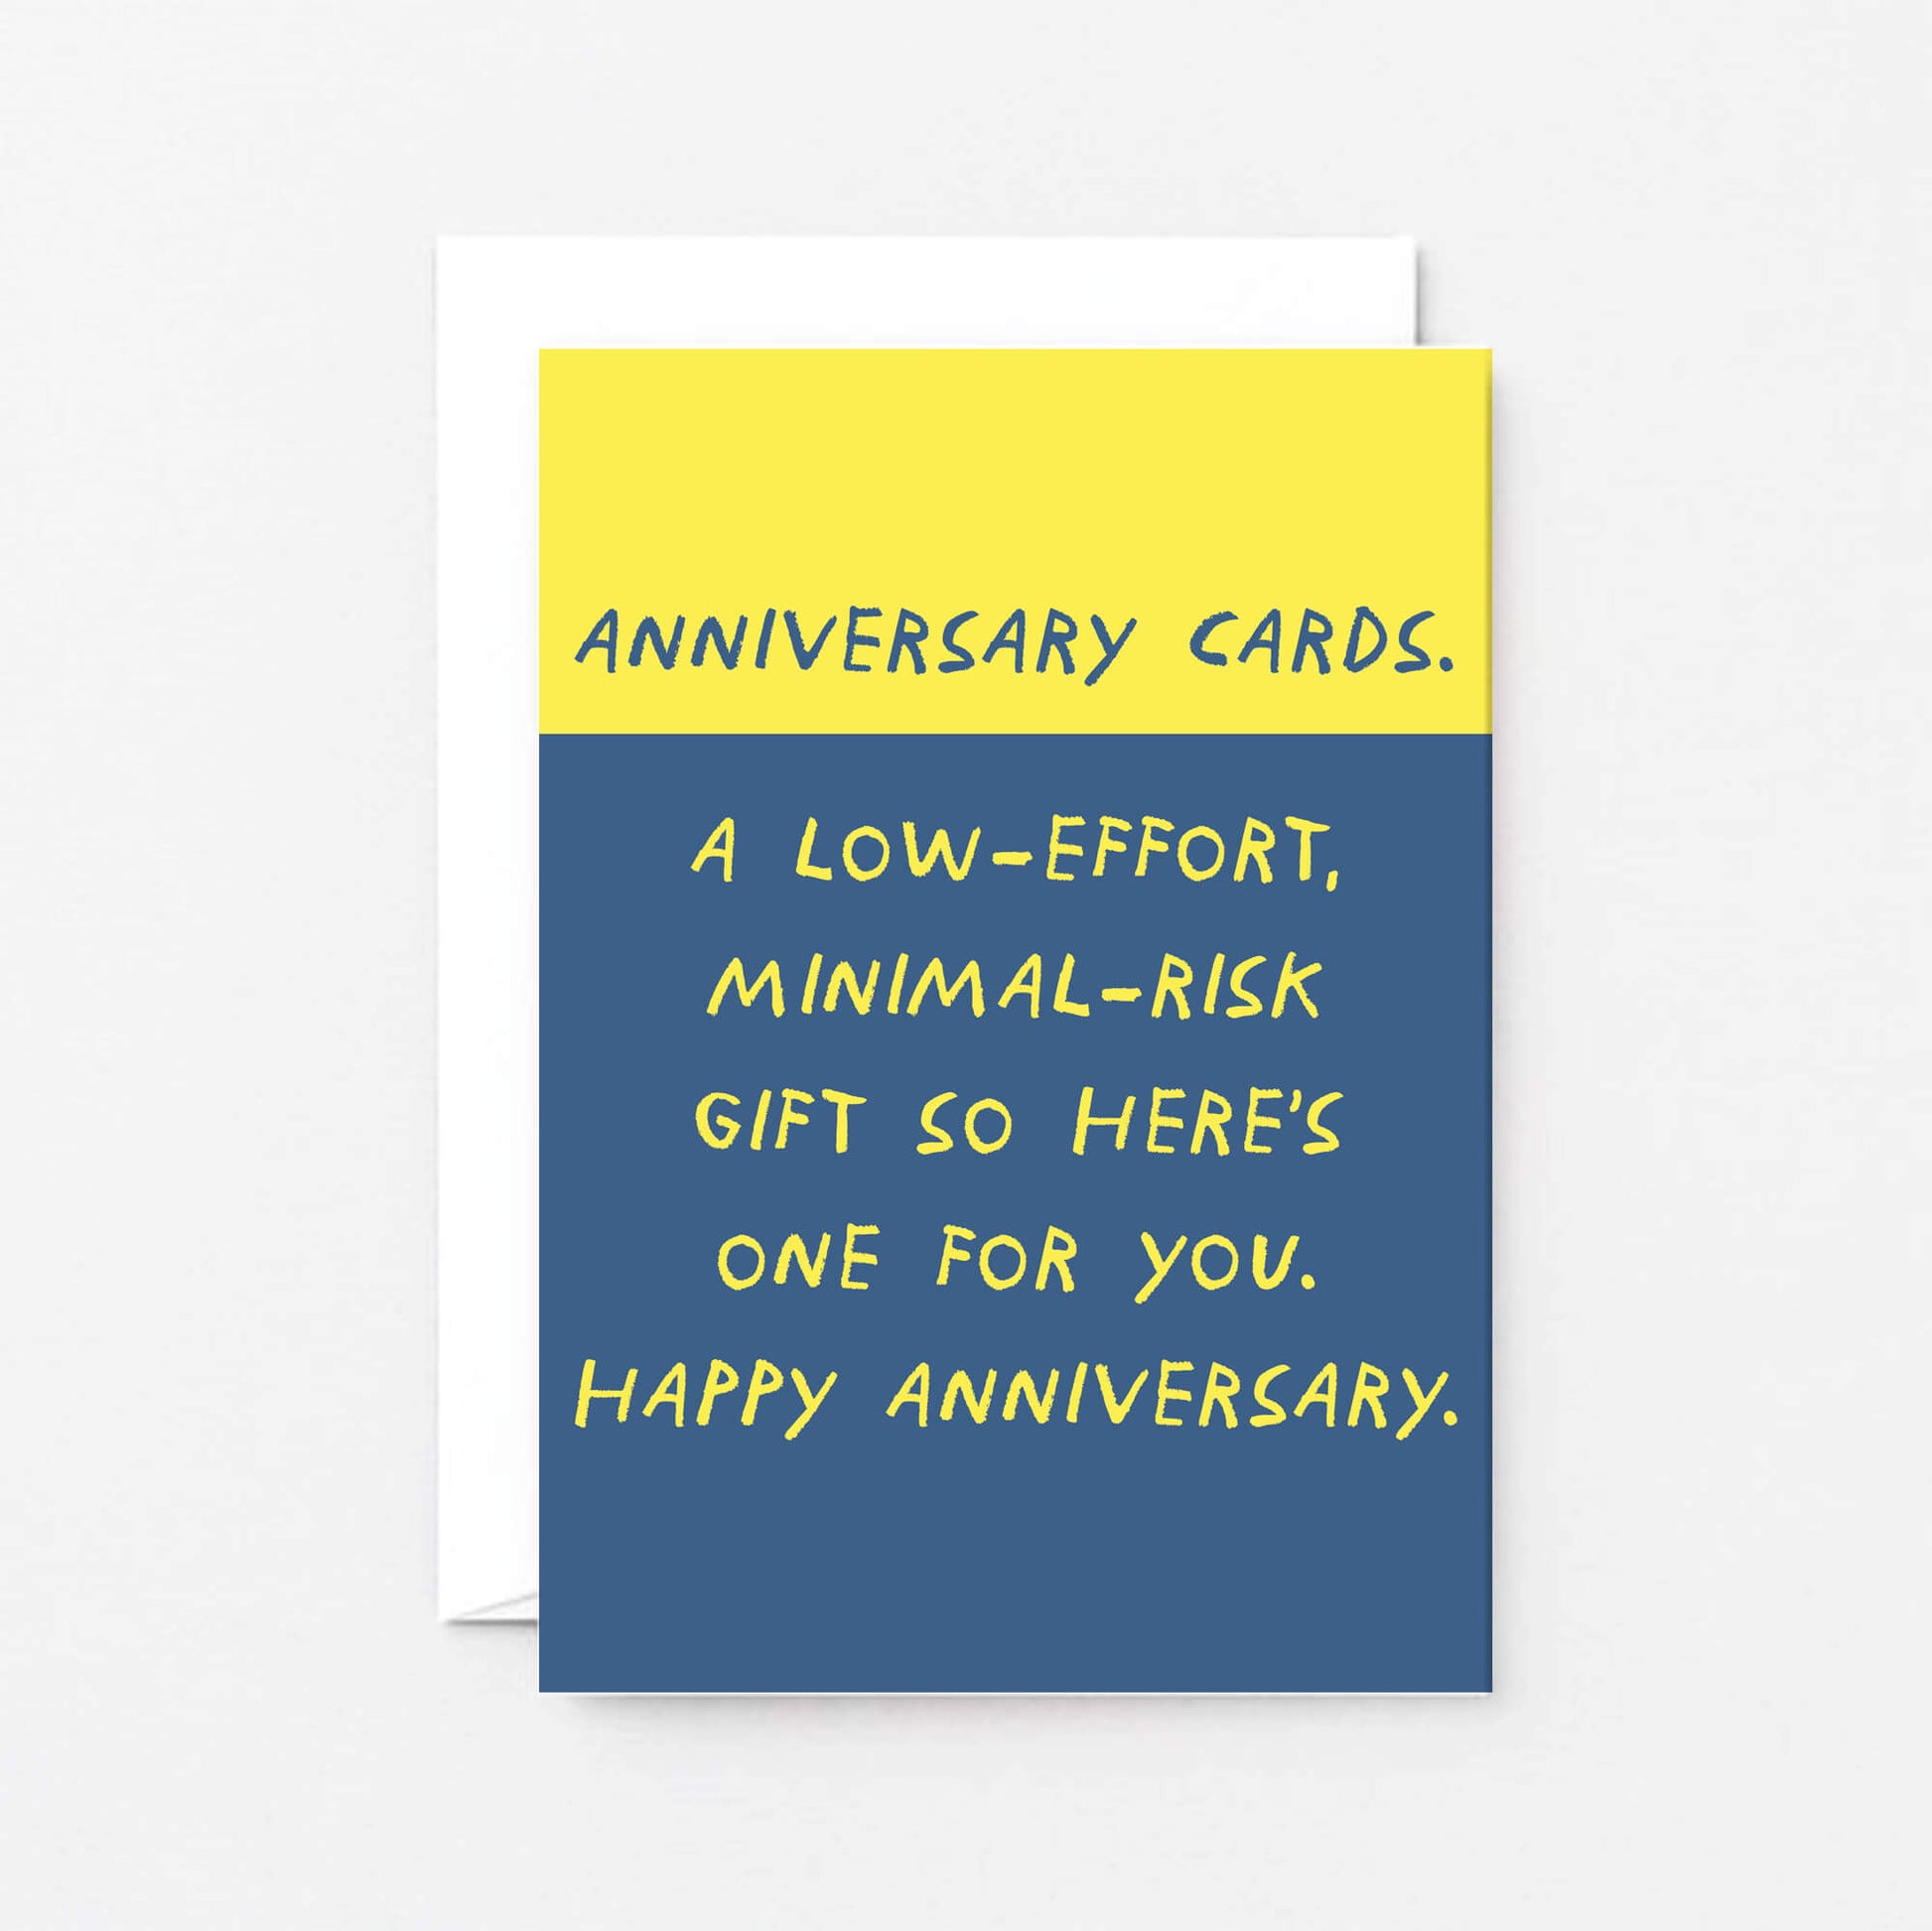 Anniversary Card by SixElevenCreations. Read Anniversary Cards. A low-effort, minimal-risk gift so here's one for you. Happy Anniversary. Product Code SE2102A6